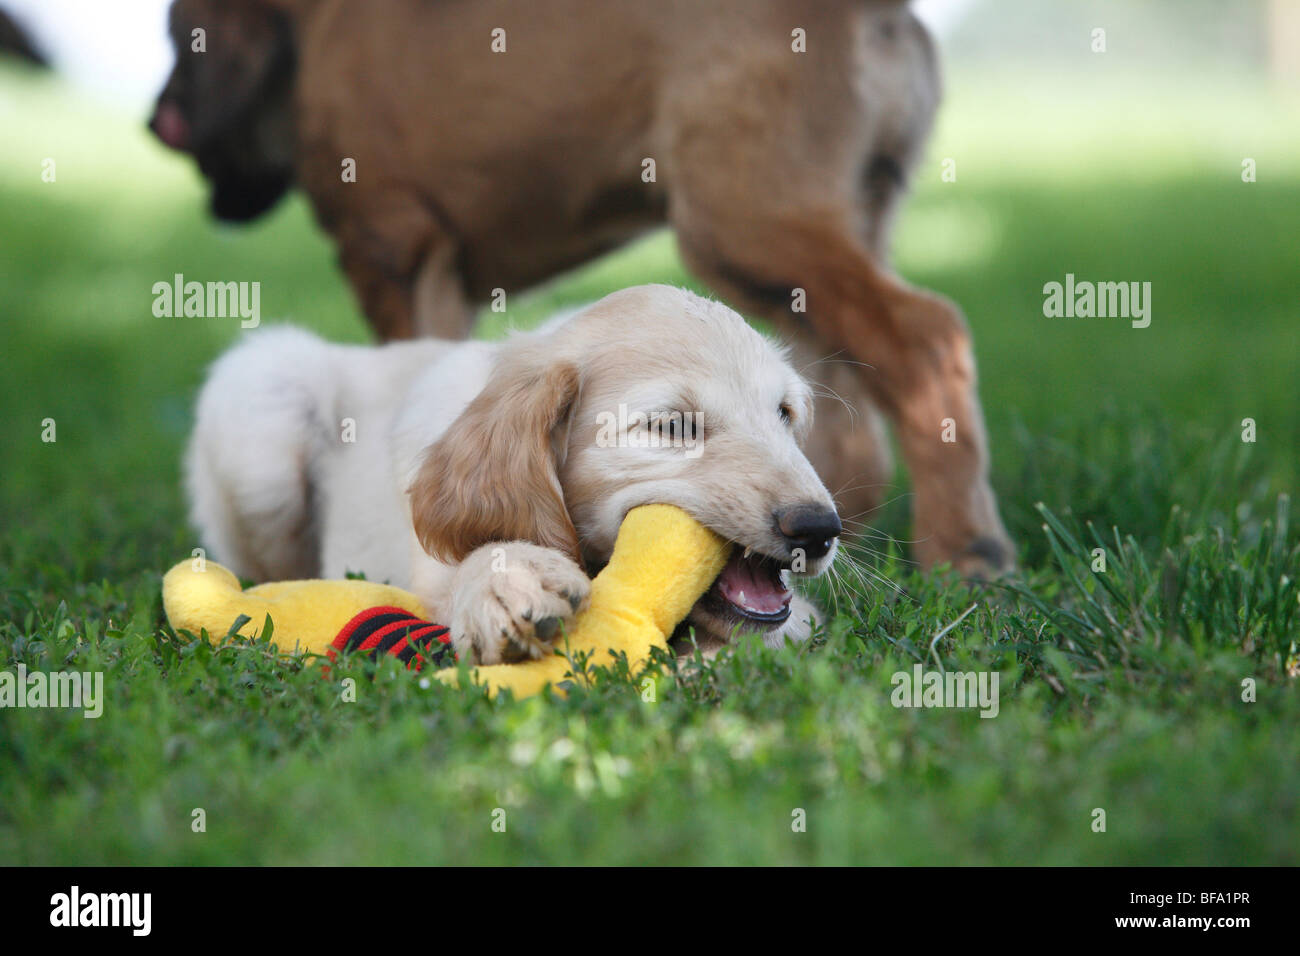 Afghanistan Hound, Afghan Hound (Canis lupus f. familiaris), puppy with a toy, Germany Stock Photo